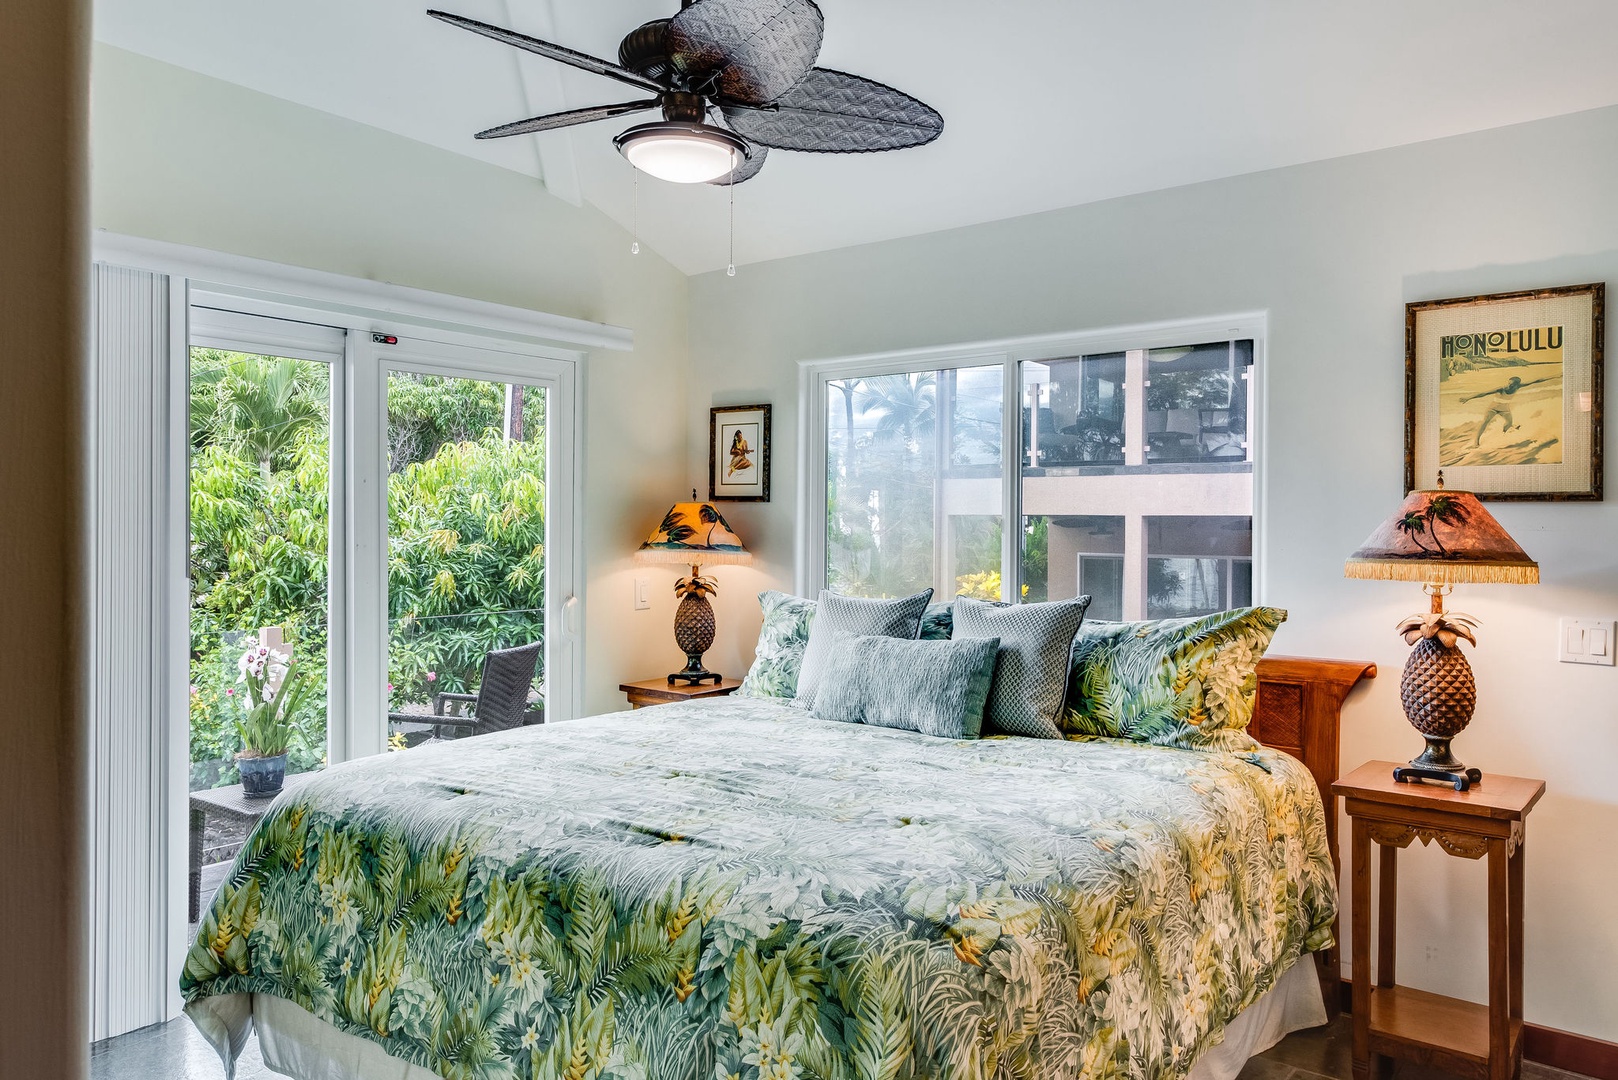 Kailua Kona Vacation Rentals, Kona Beach Bungalows** - Indulge in the luxury of the Kahakai Master Suite, featuring a plush king bed for the ultimate relaxation experience.